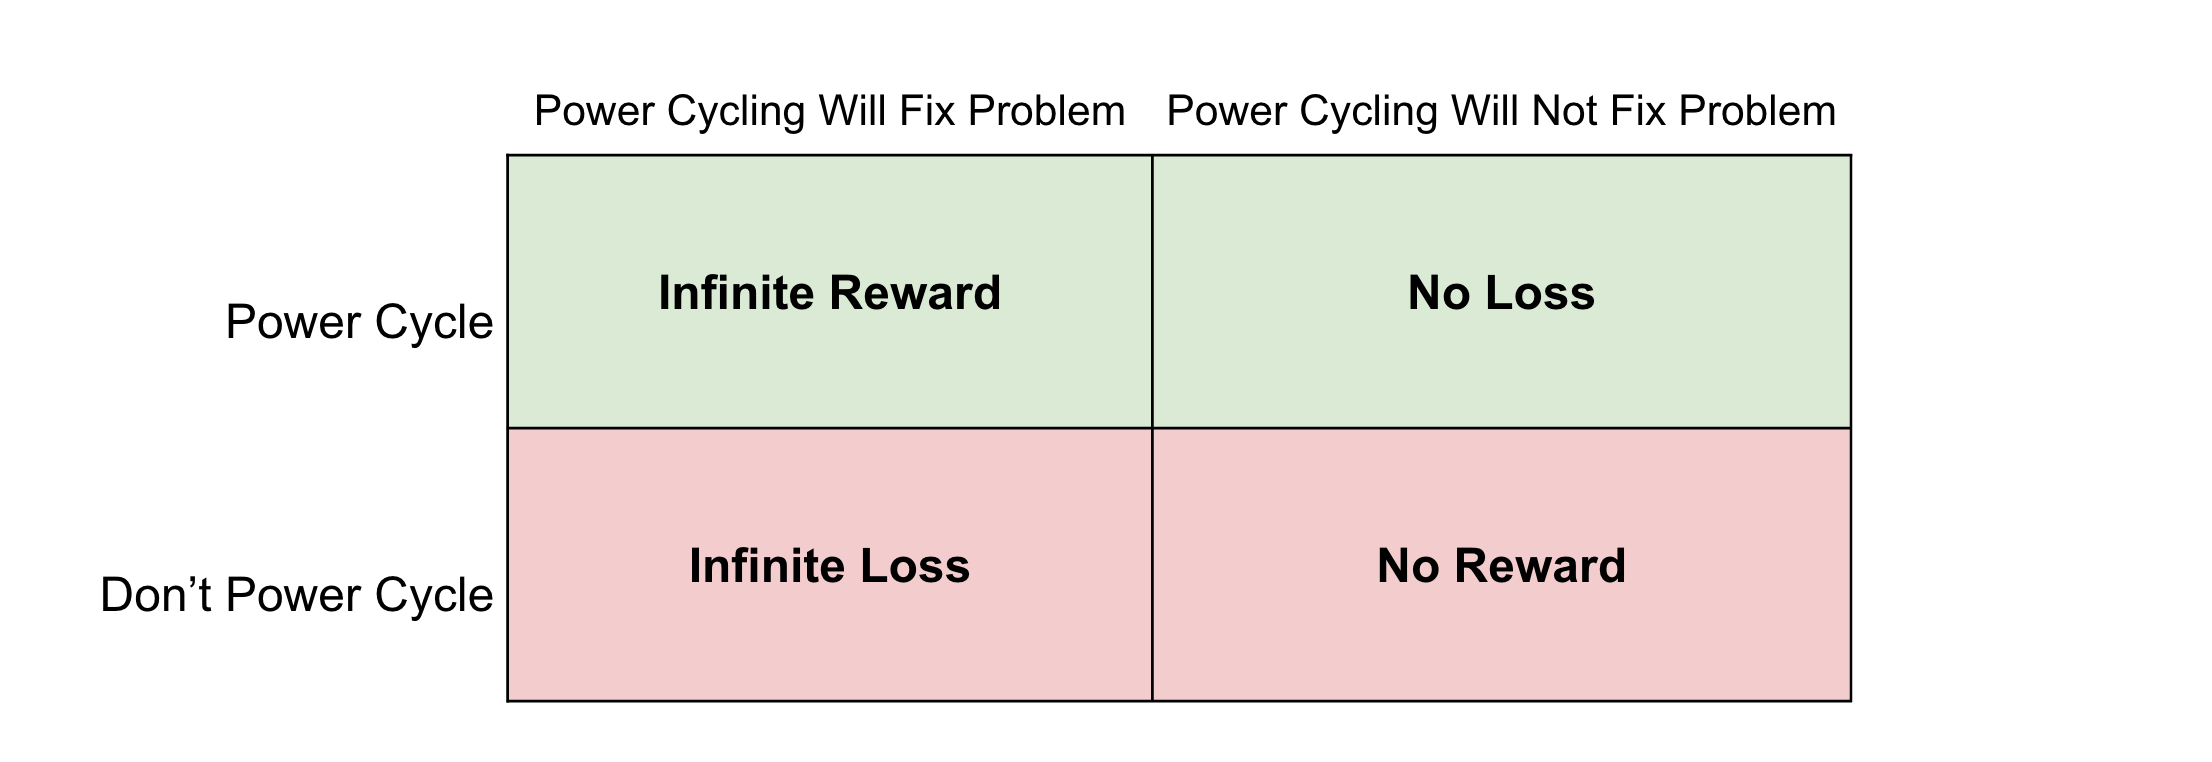 4 quadrant diagram on expected value of power cycling